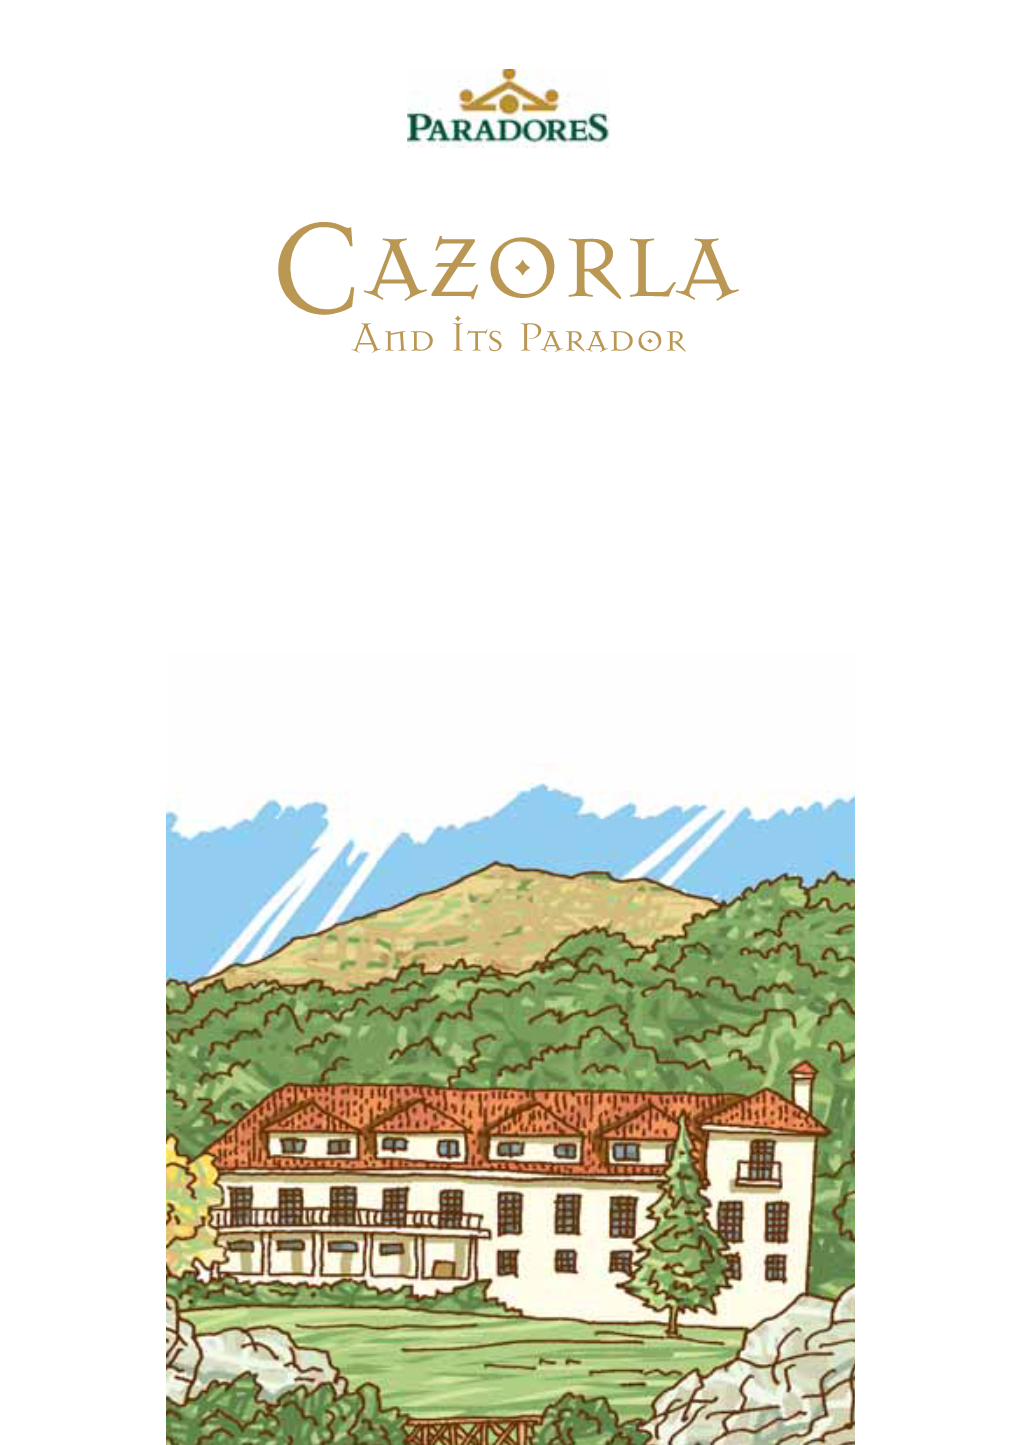 AZORLA Cand Its Parador Mater Amantissima (Ever- Loving Mother) of Rivers and Mountains